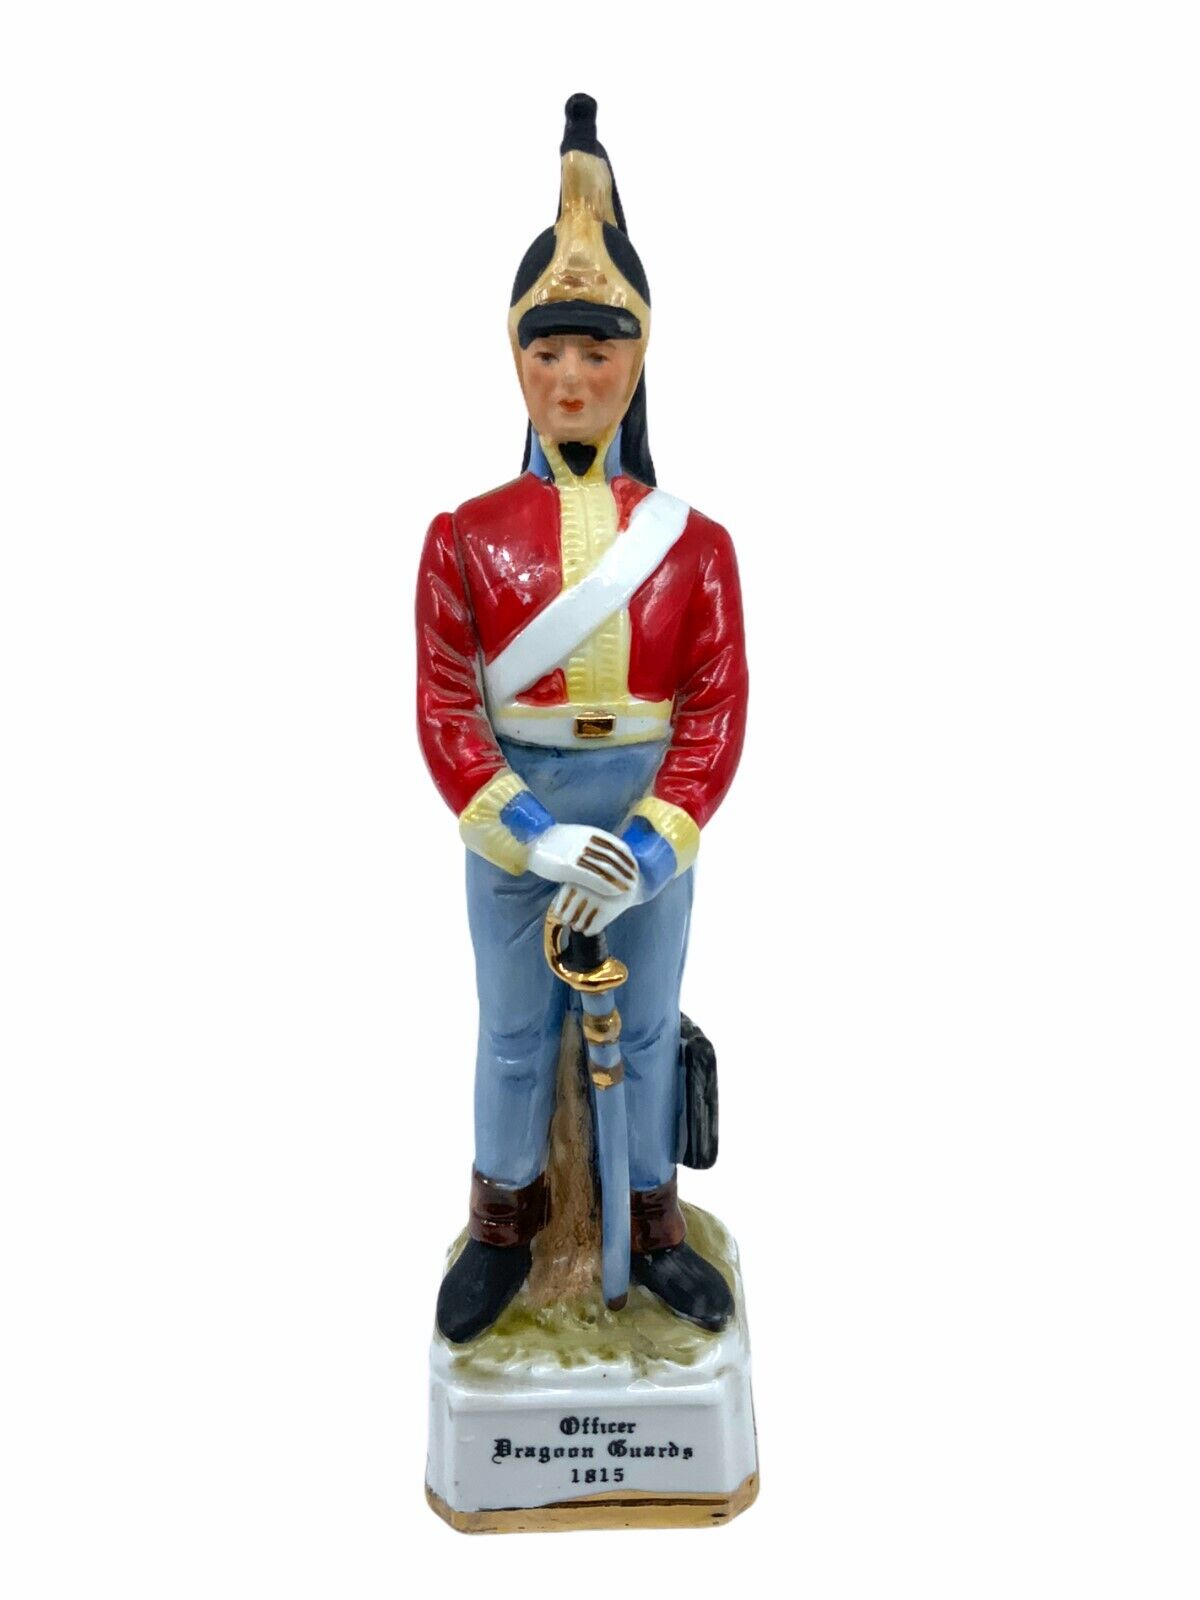 Napoleonic British Dragoon Guards Officer Porcelain Figure 9 Inches